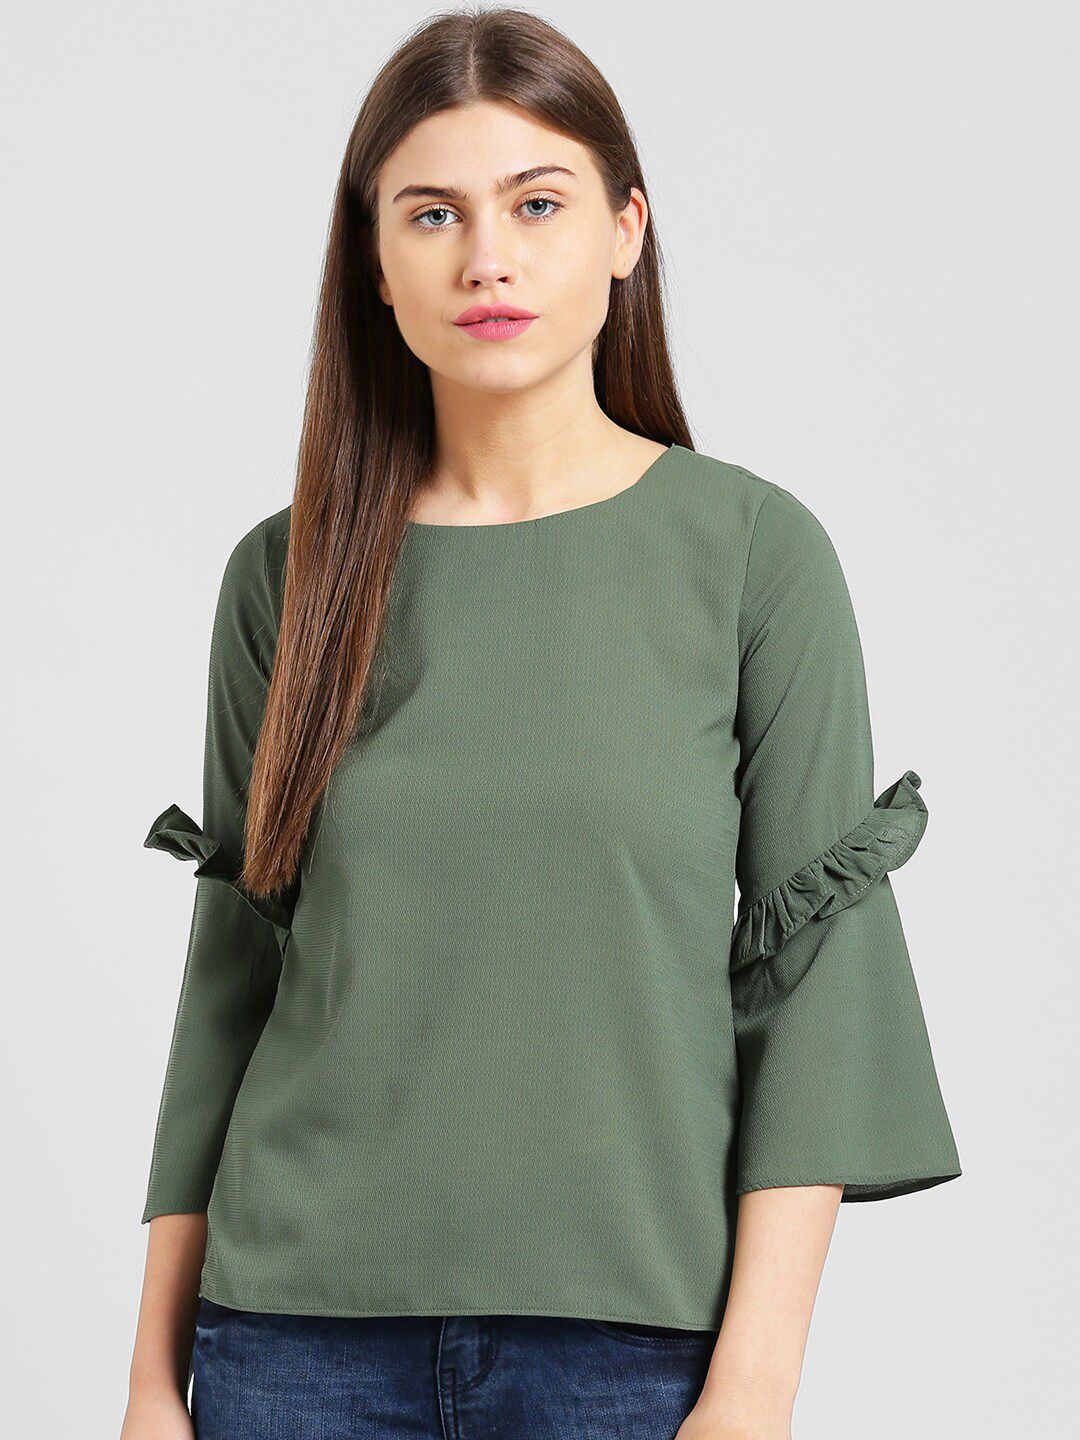 Be Indi Women Olive Green Crepe Top Price in India